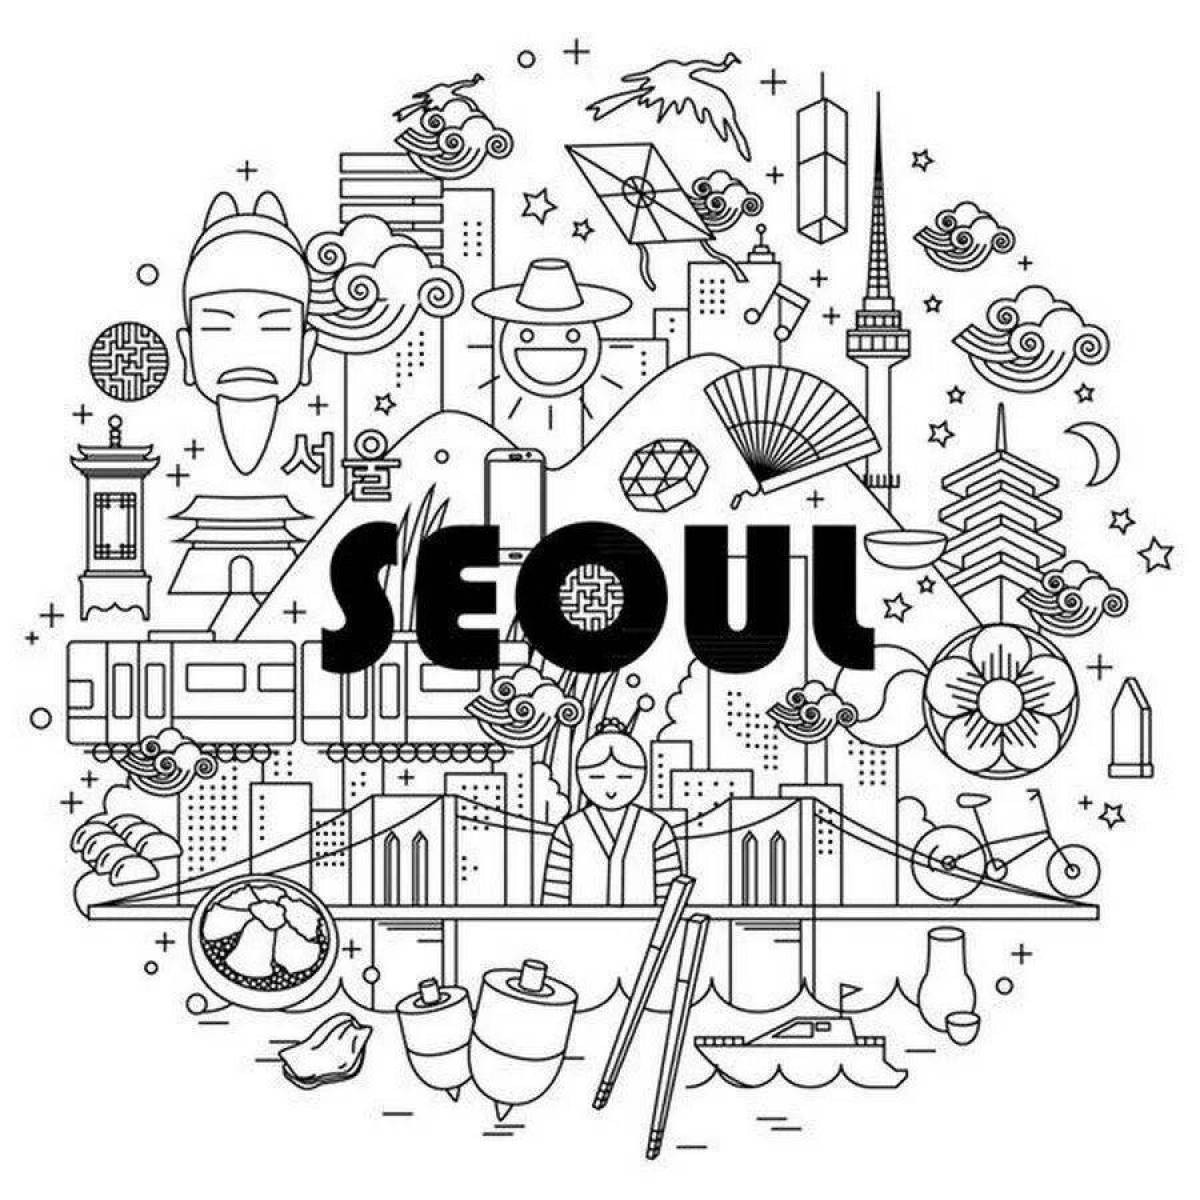 Awesome kpop coloring page